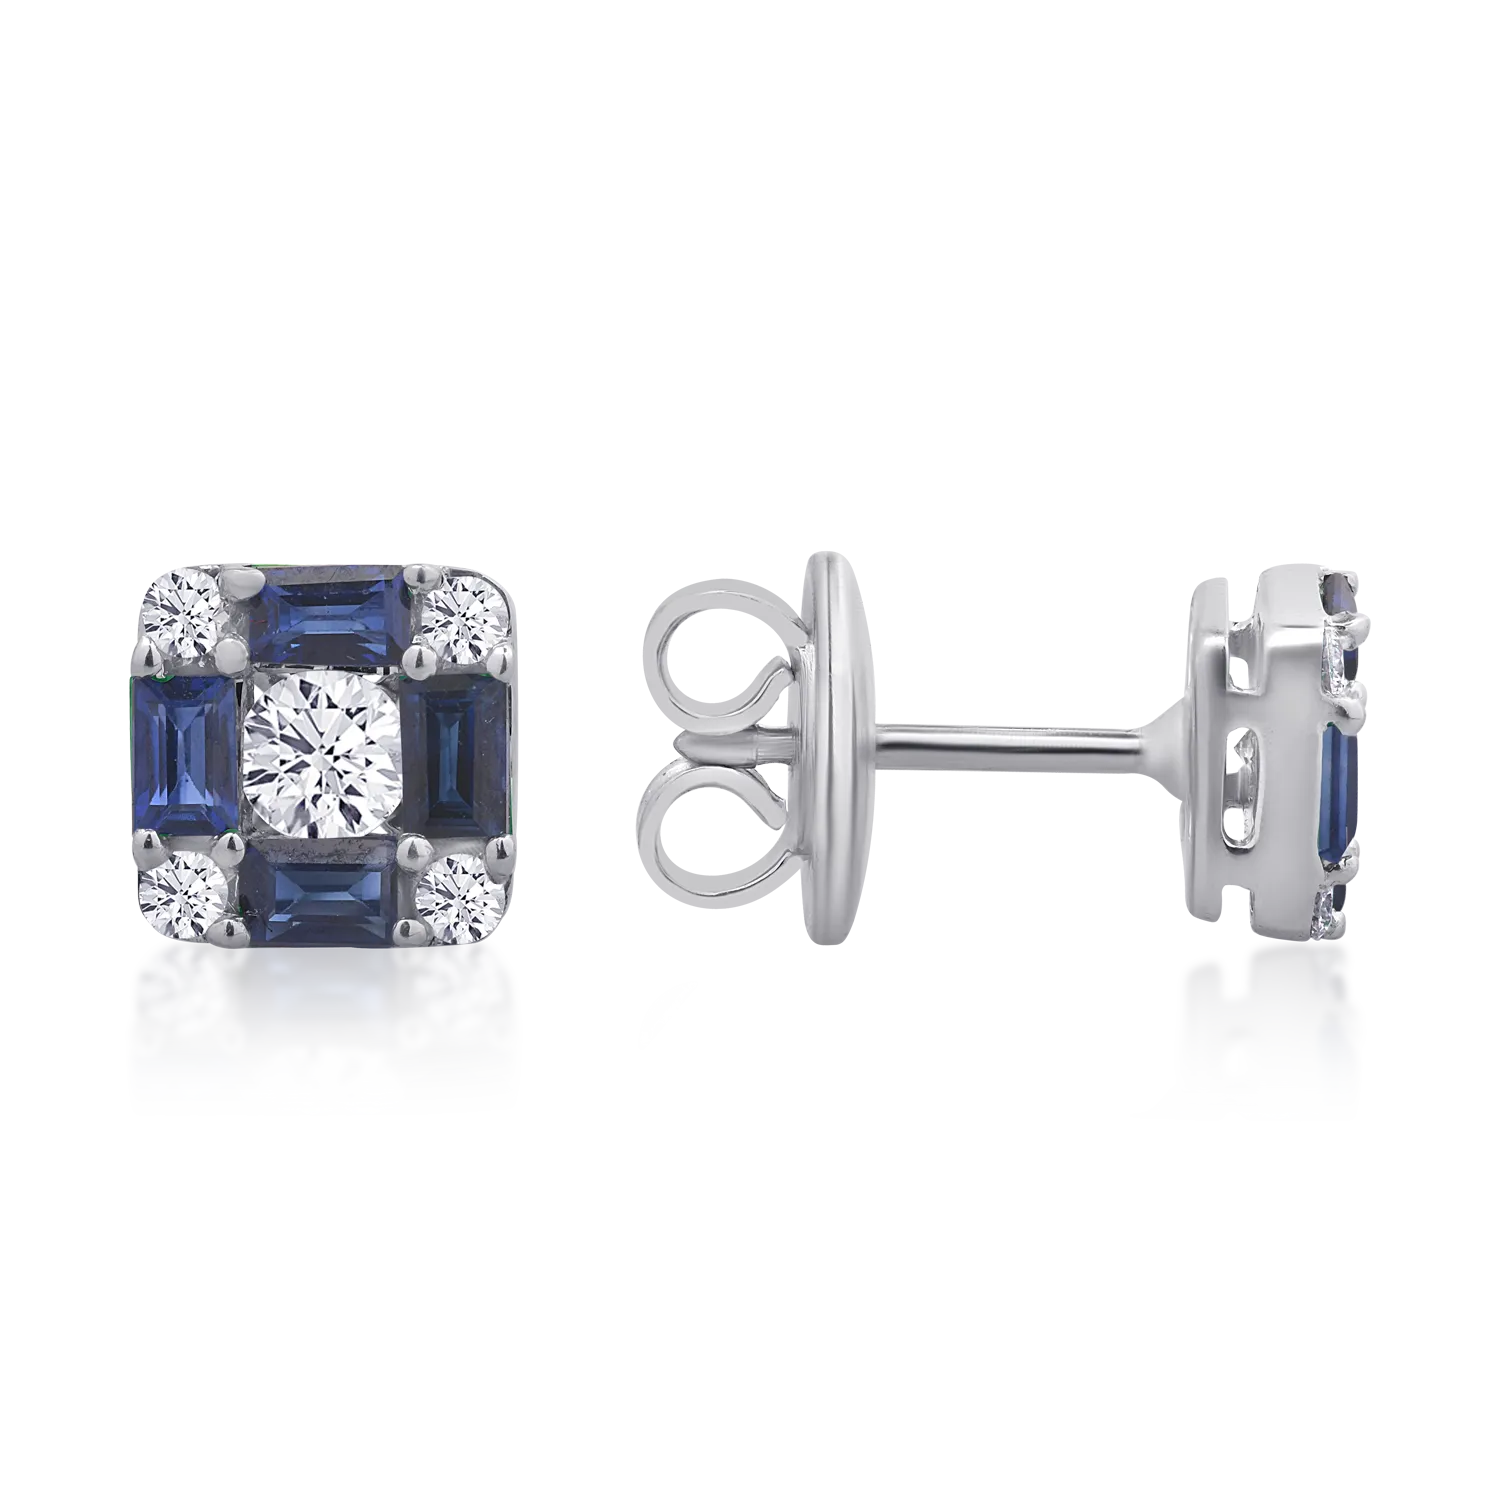 18K white gold earrings with 0.8ct sapphires and 0.38ct diamonds